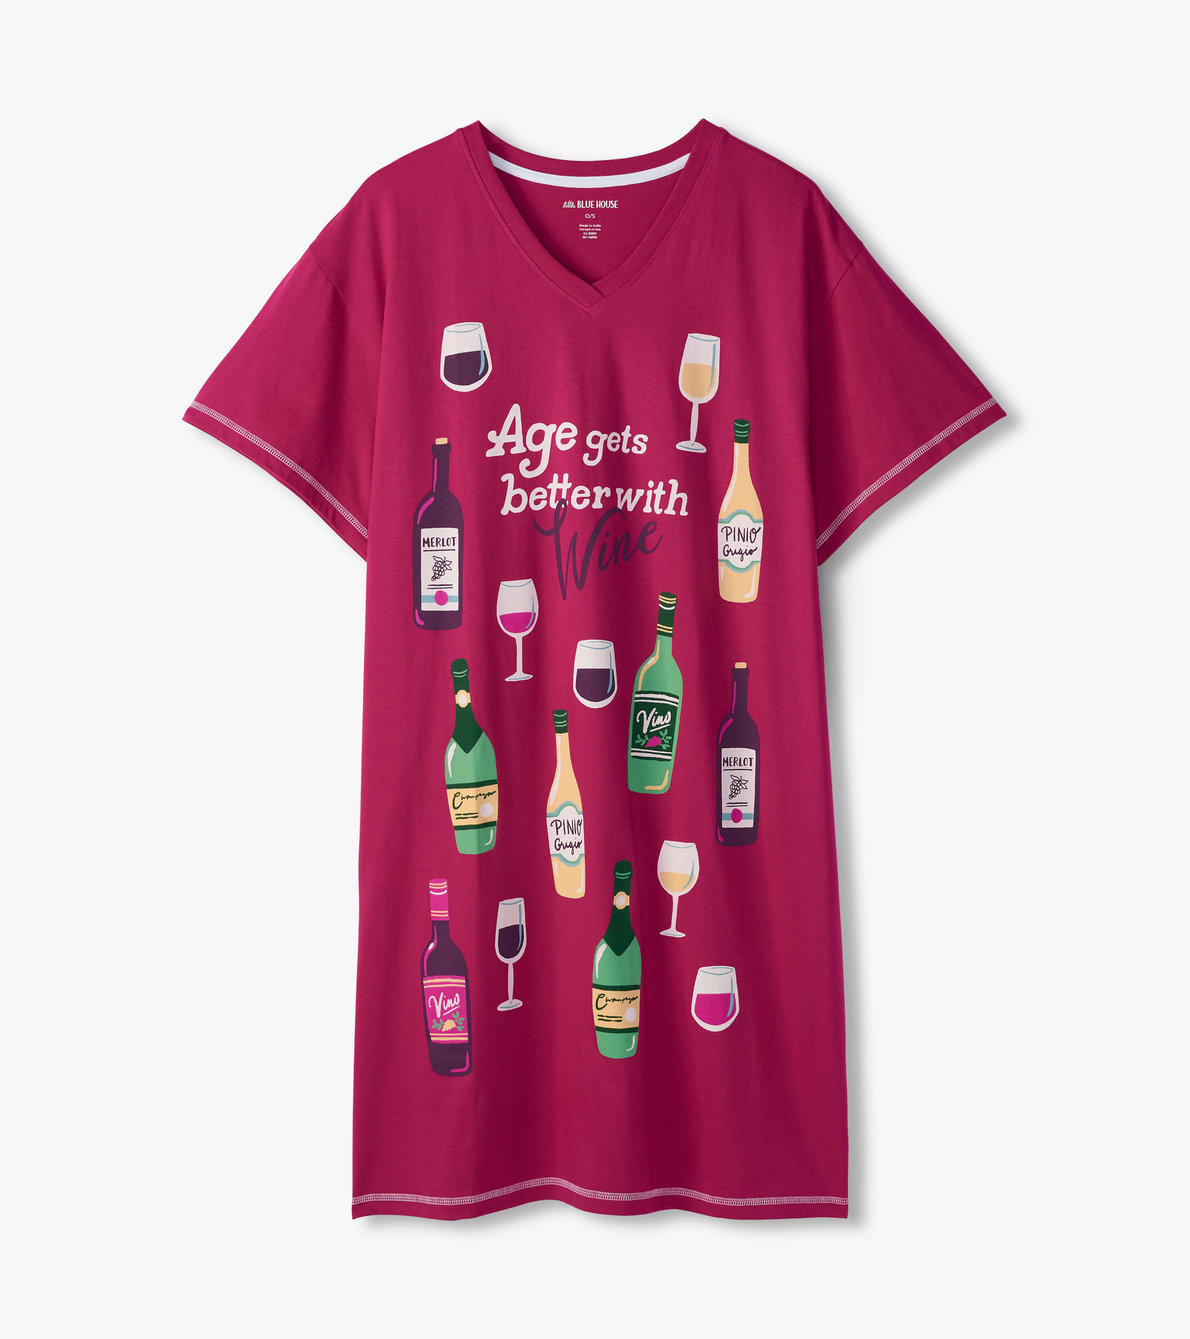 View larger image of Age Gets Better with Wine Women's Sleepshirt